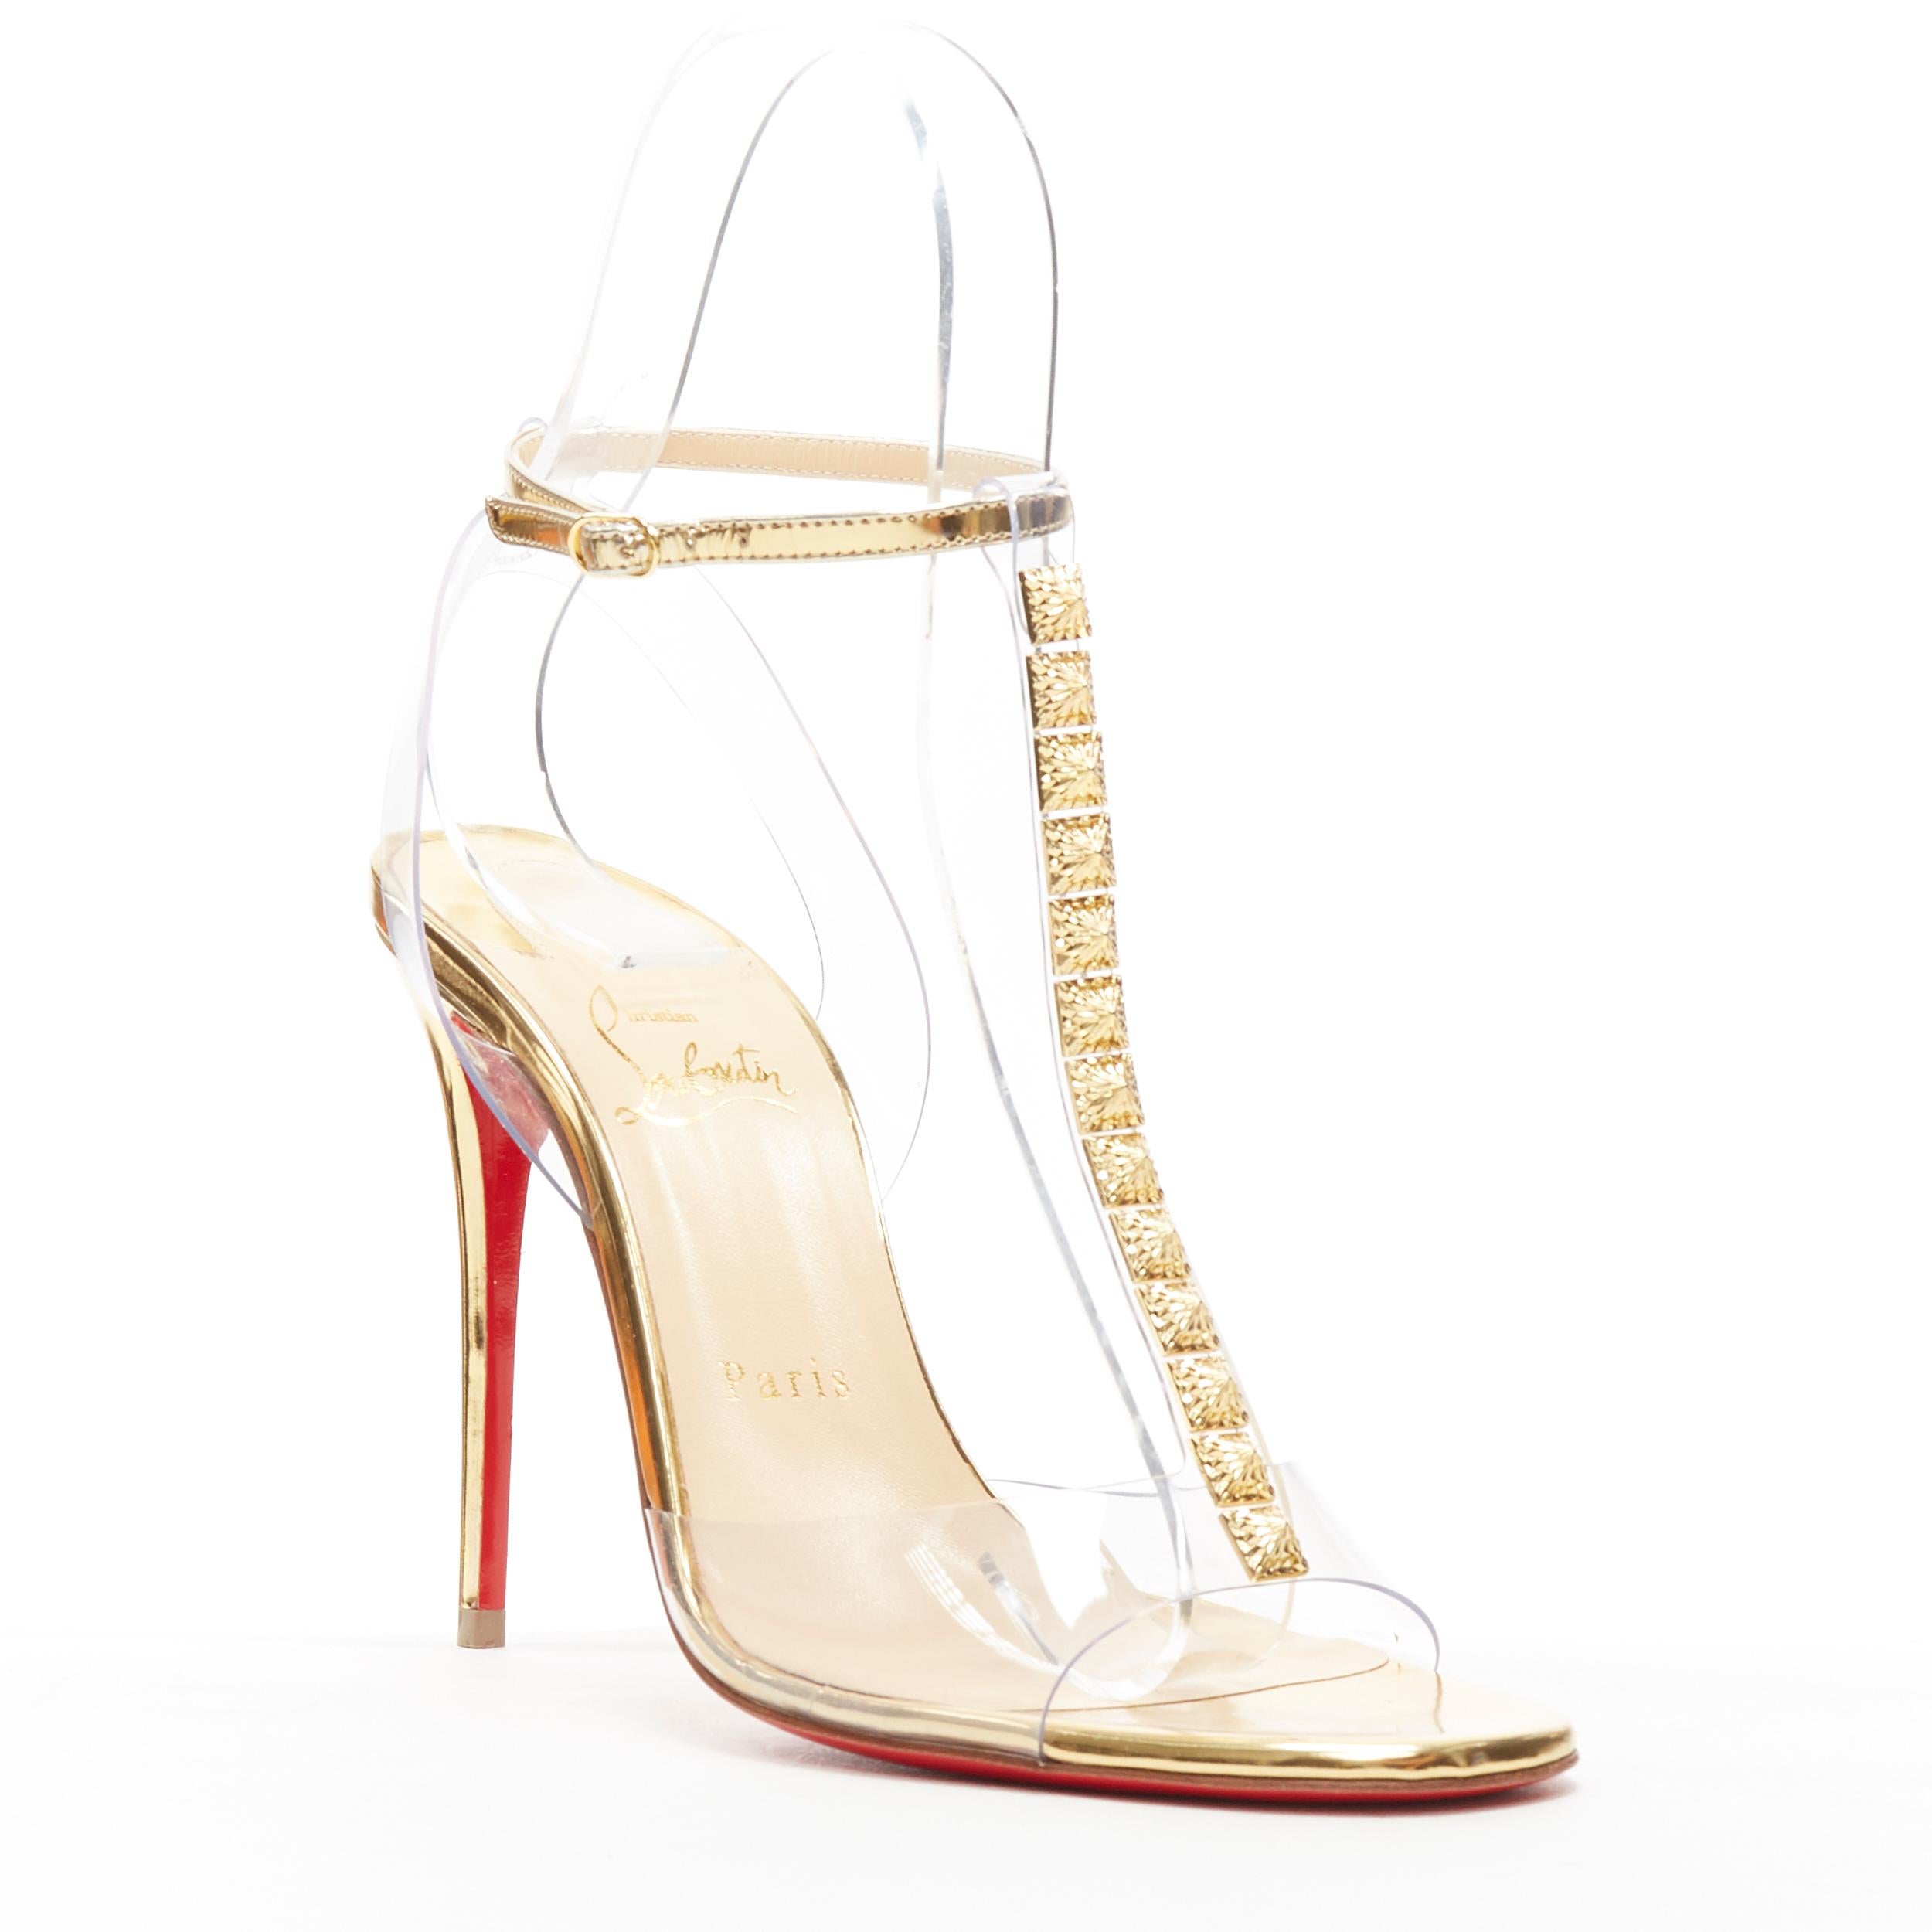 new CHRISTIAN LOUBOUTIN Jamais Assez 100 gold studded T-strap PVC heels EU38
Brand: Christian Louboutin
Designer: Christian Louboutin
Model Name / Style: Jamais Assez 100
Material: PVC
Color: Gold
Pattern: Solid
Closure: Buckle
Extra Detail: Style